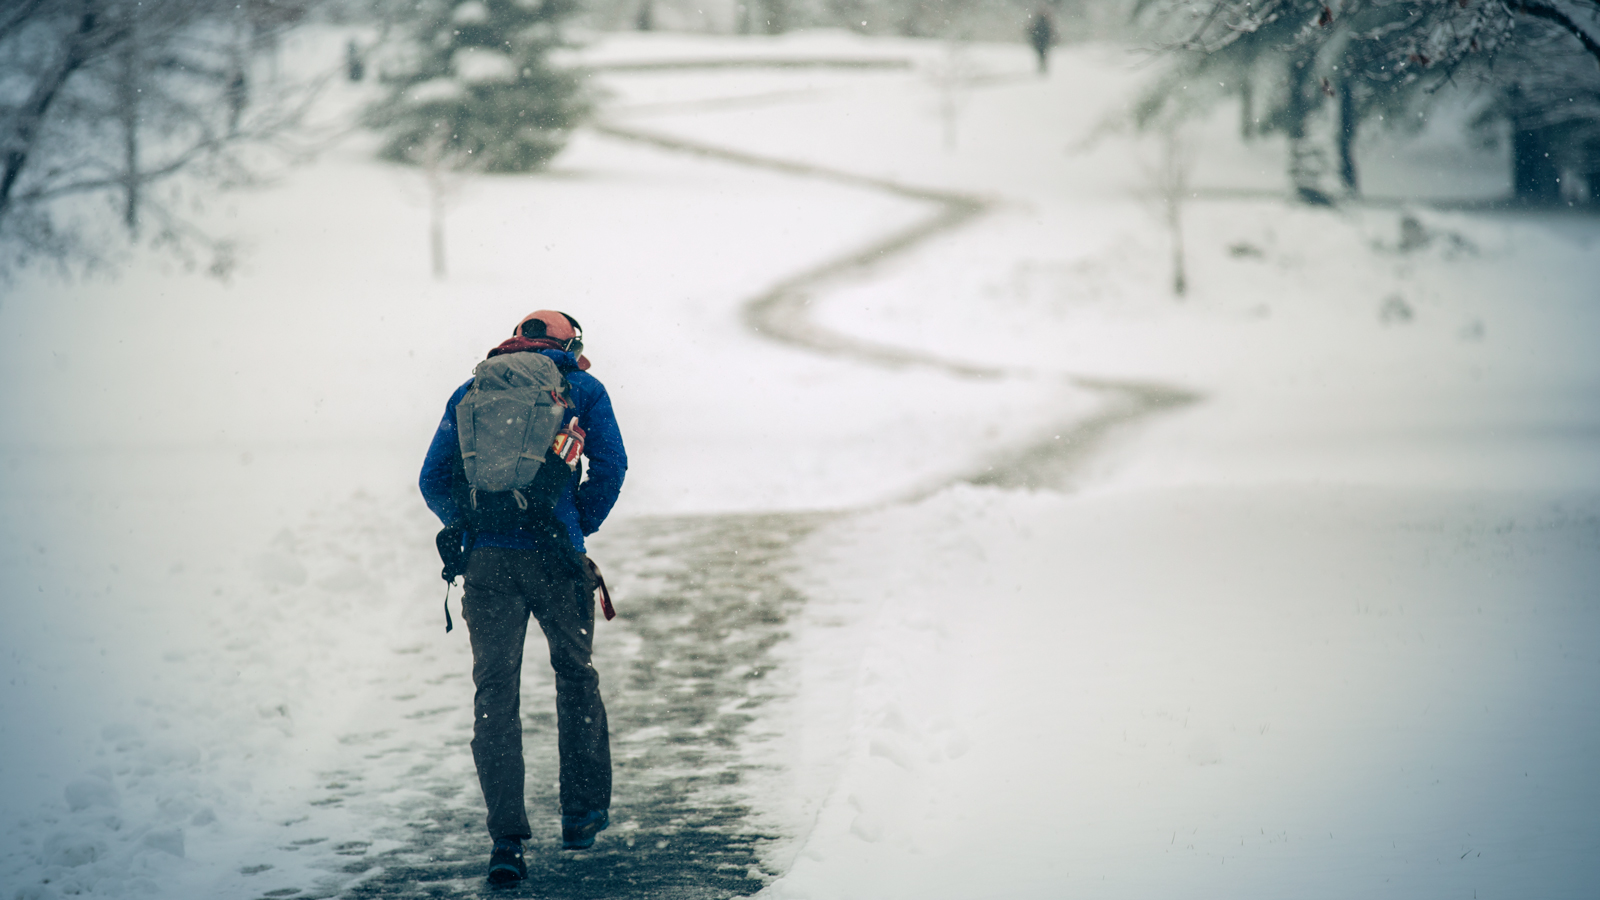 A student begins the long ascent up Libe Slope after a fresh snowfall